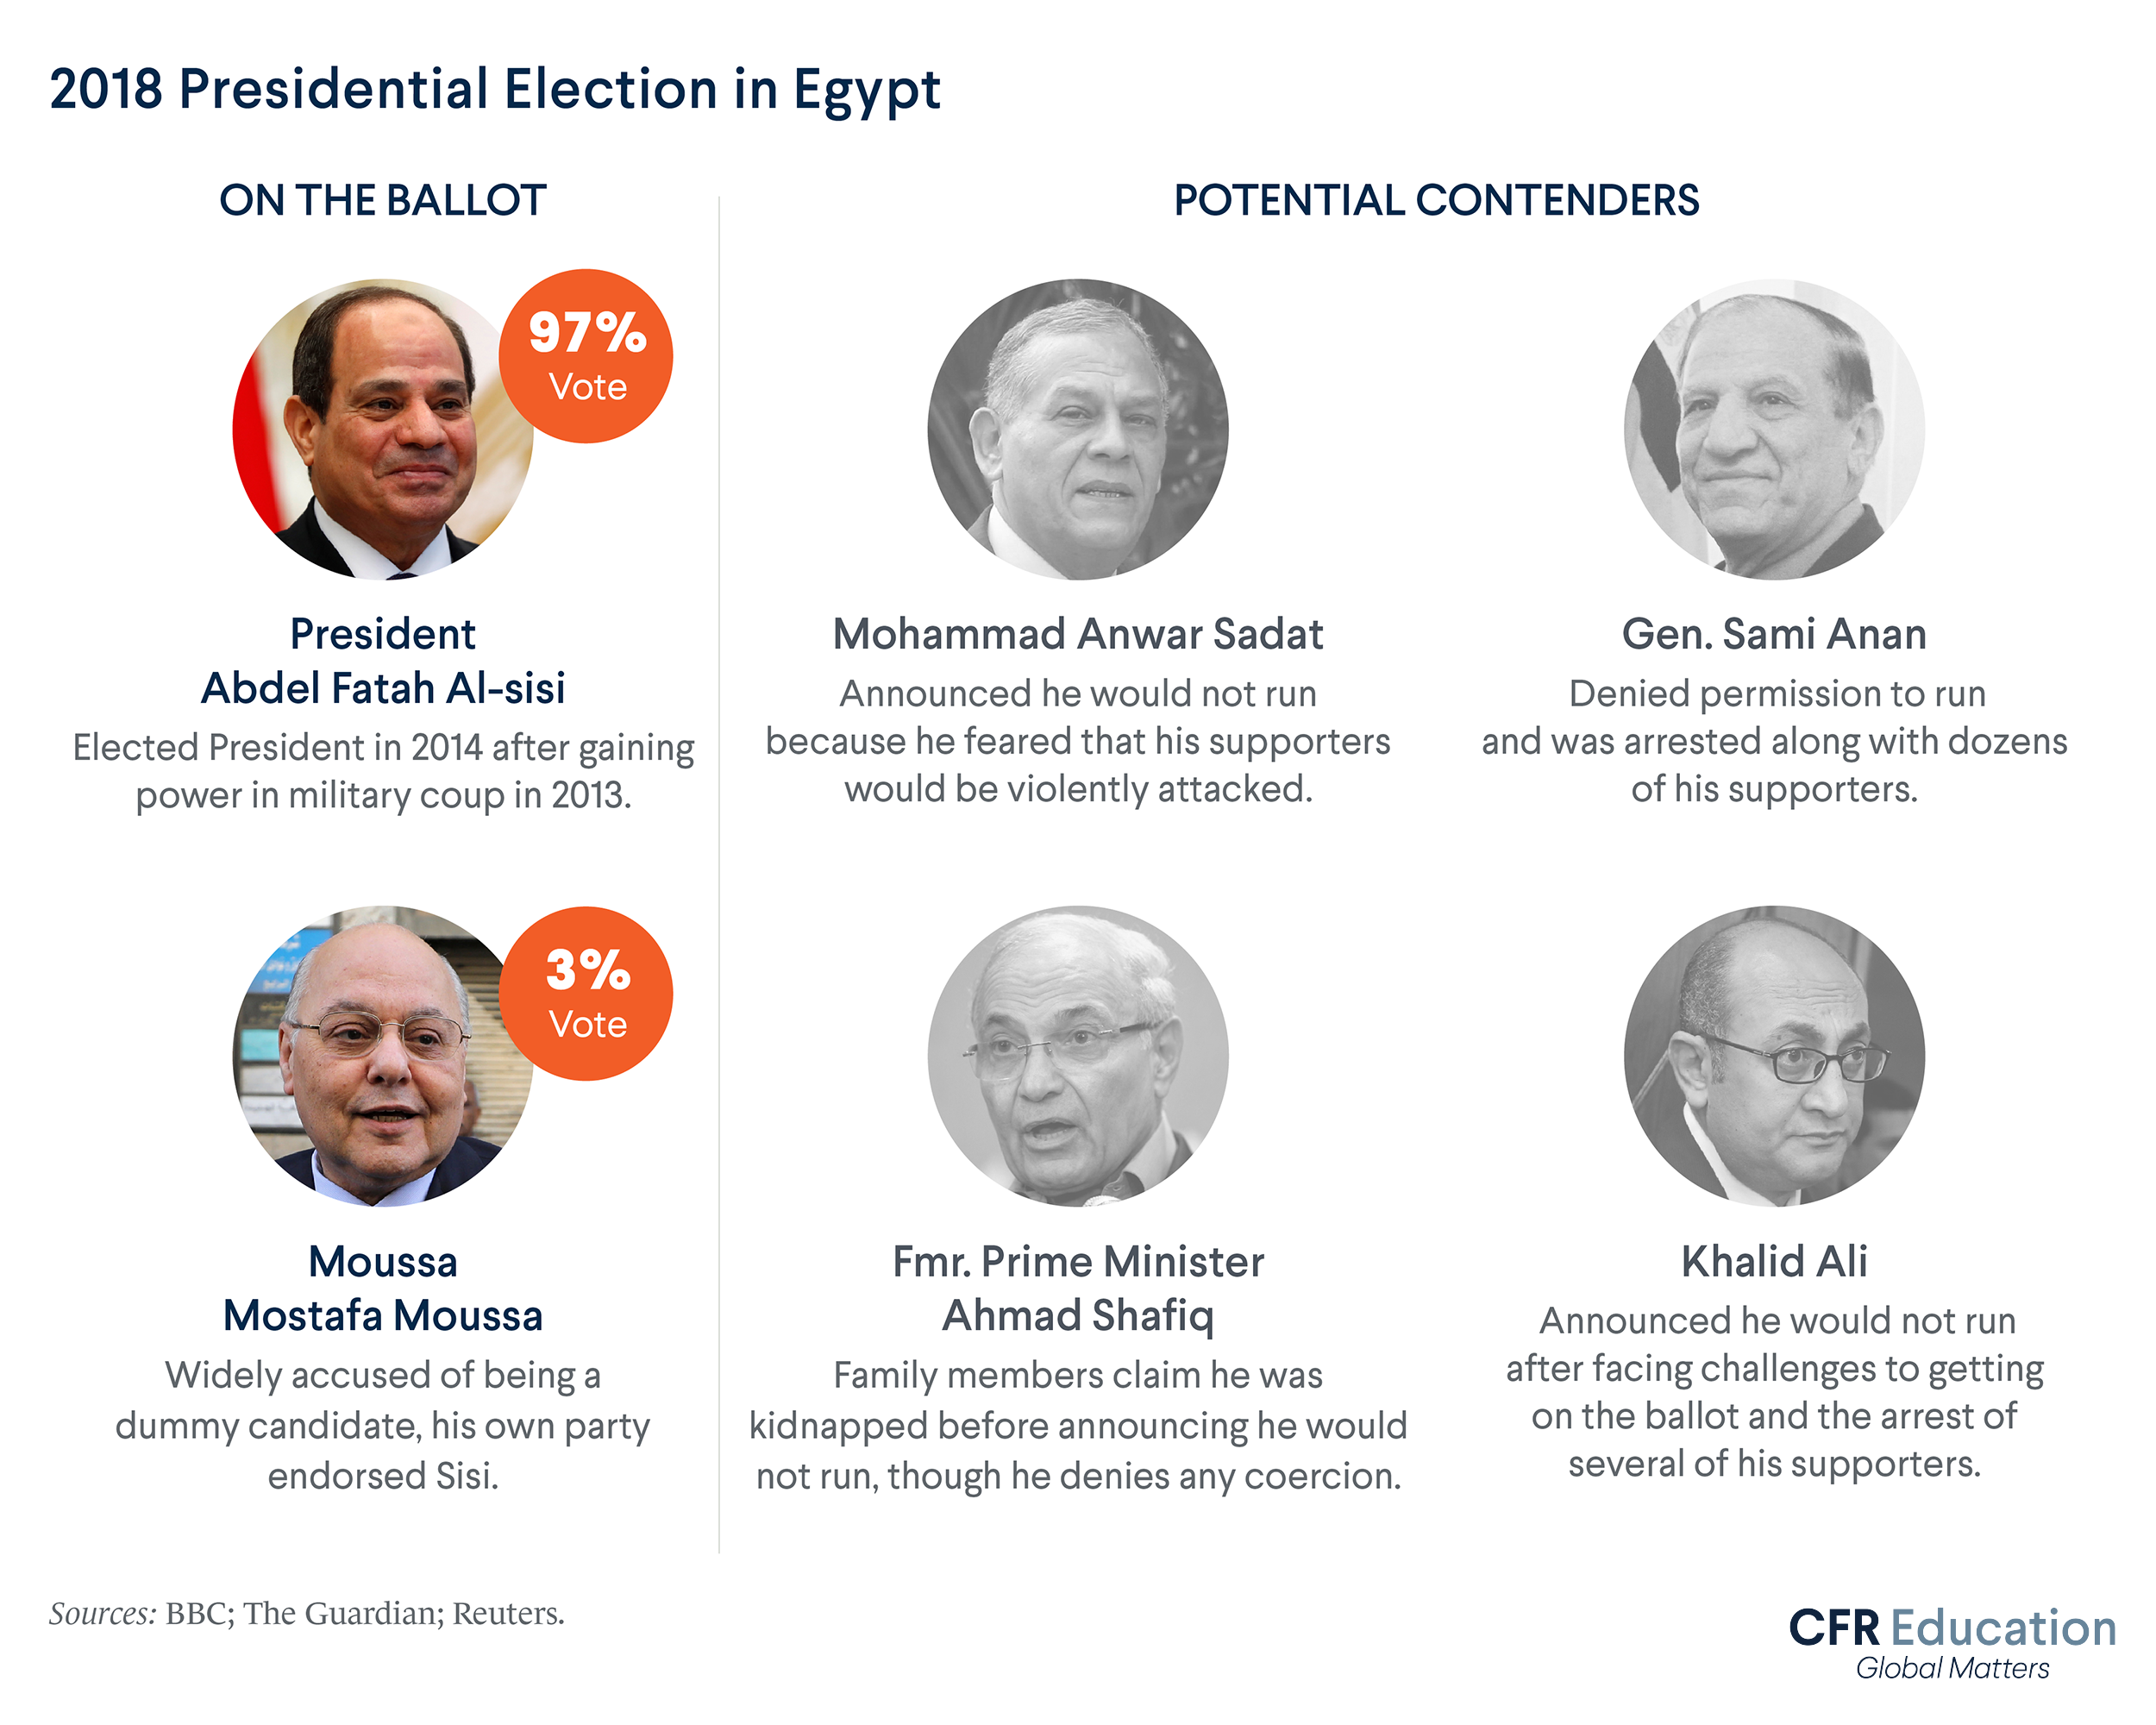 Infographic illustrating how General al-Sisi won Egypt’s 2018 presidential election with 97% of vote. Sisi imprisoned, intimidated, or barred every legitimate political opponent from running against him. For more info contact us at cfr_education@cfr.org.